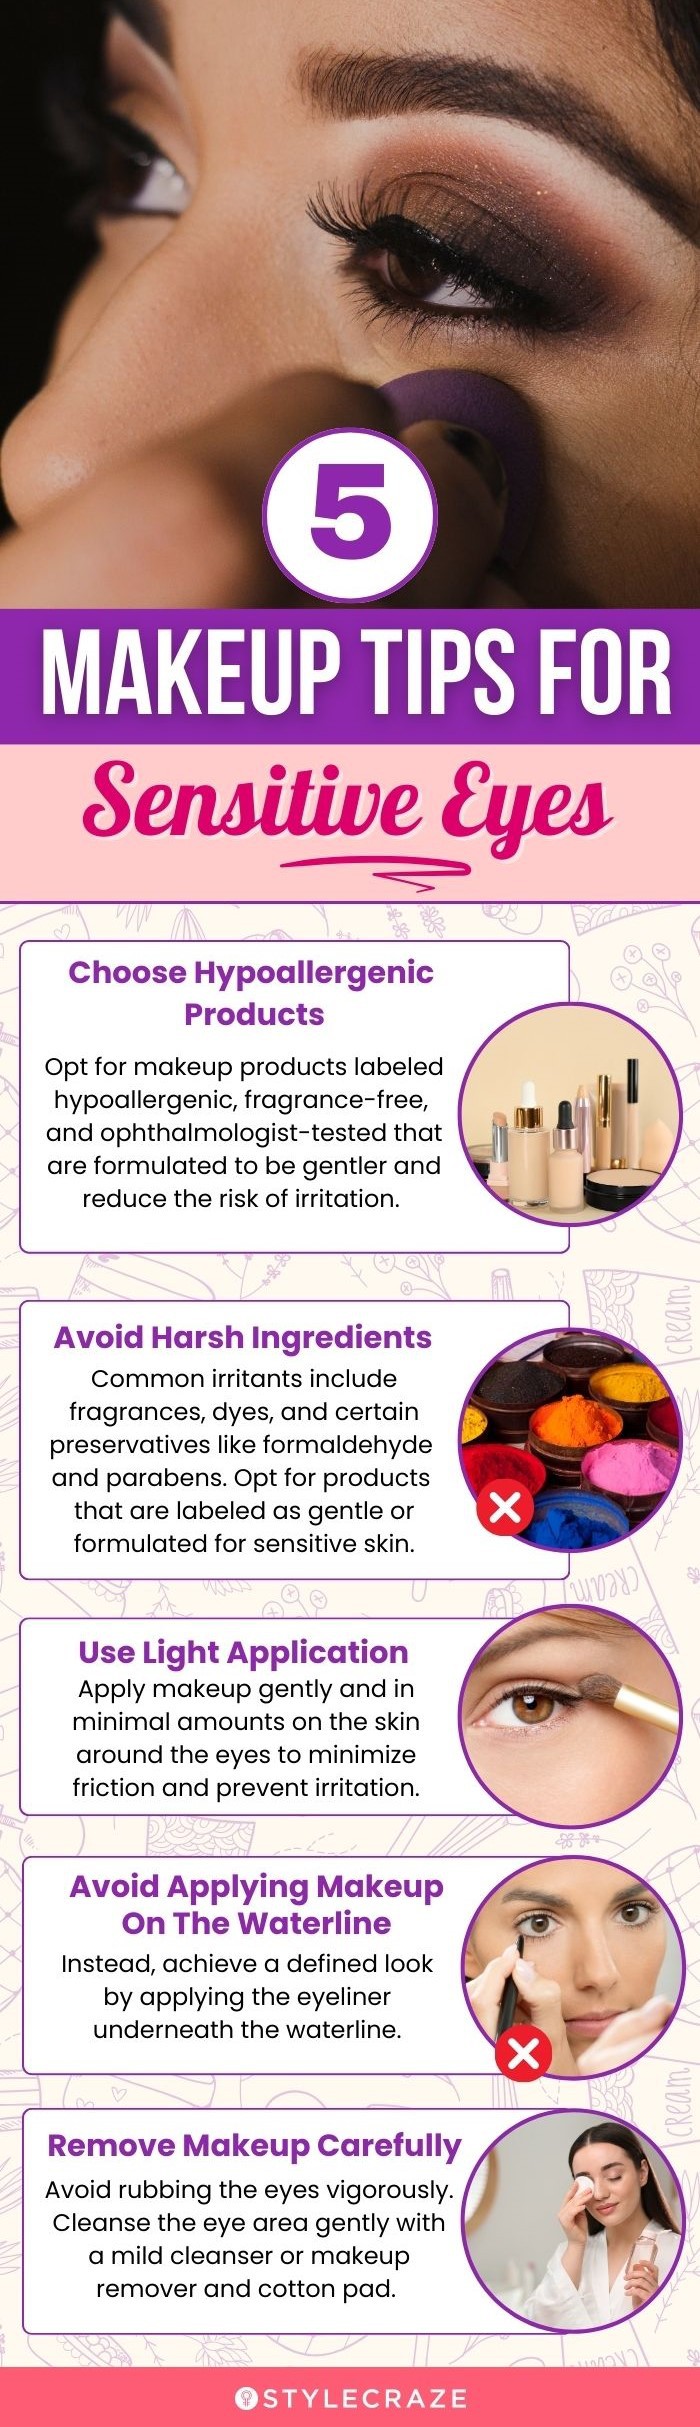 5 makeup tips for sensitive eyes (infographic)